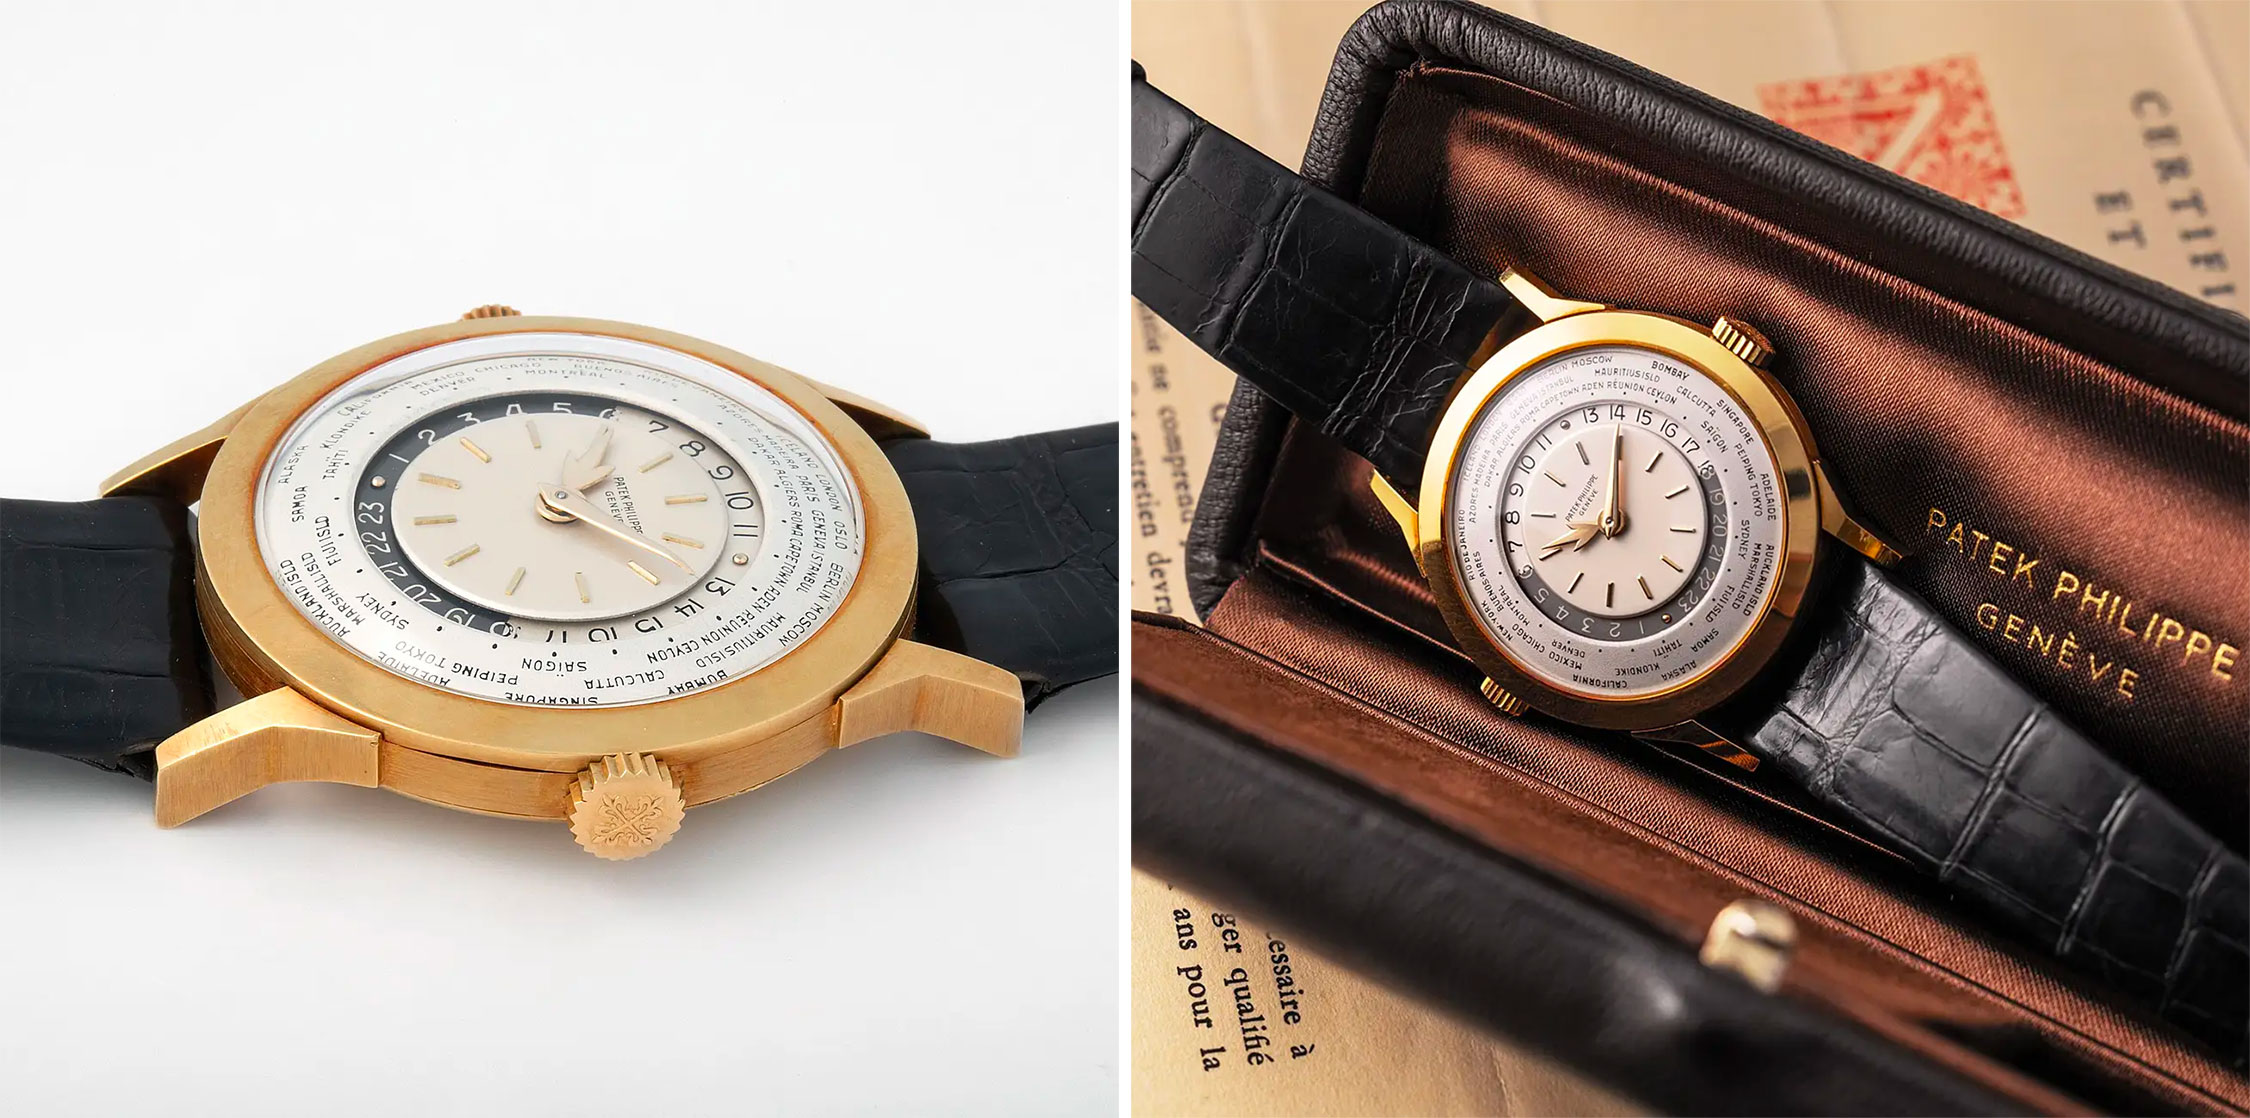 Authentic, Valuable: The Most Beautiful Watches at the Monaco Legend Group  Auction